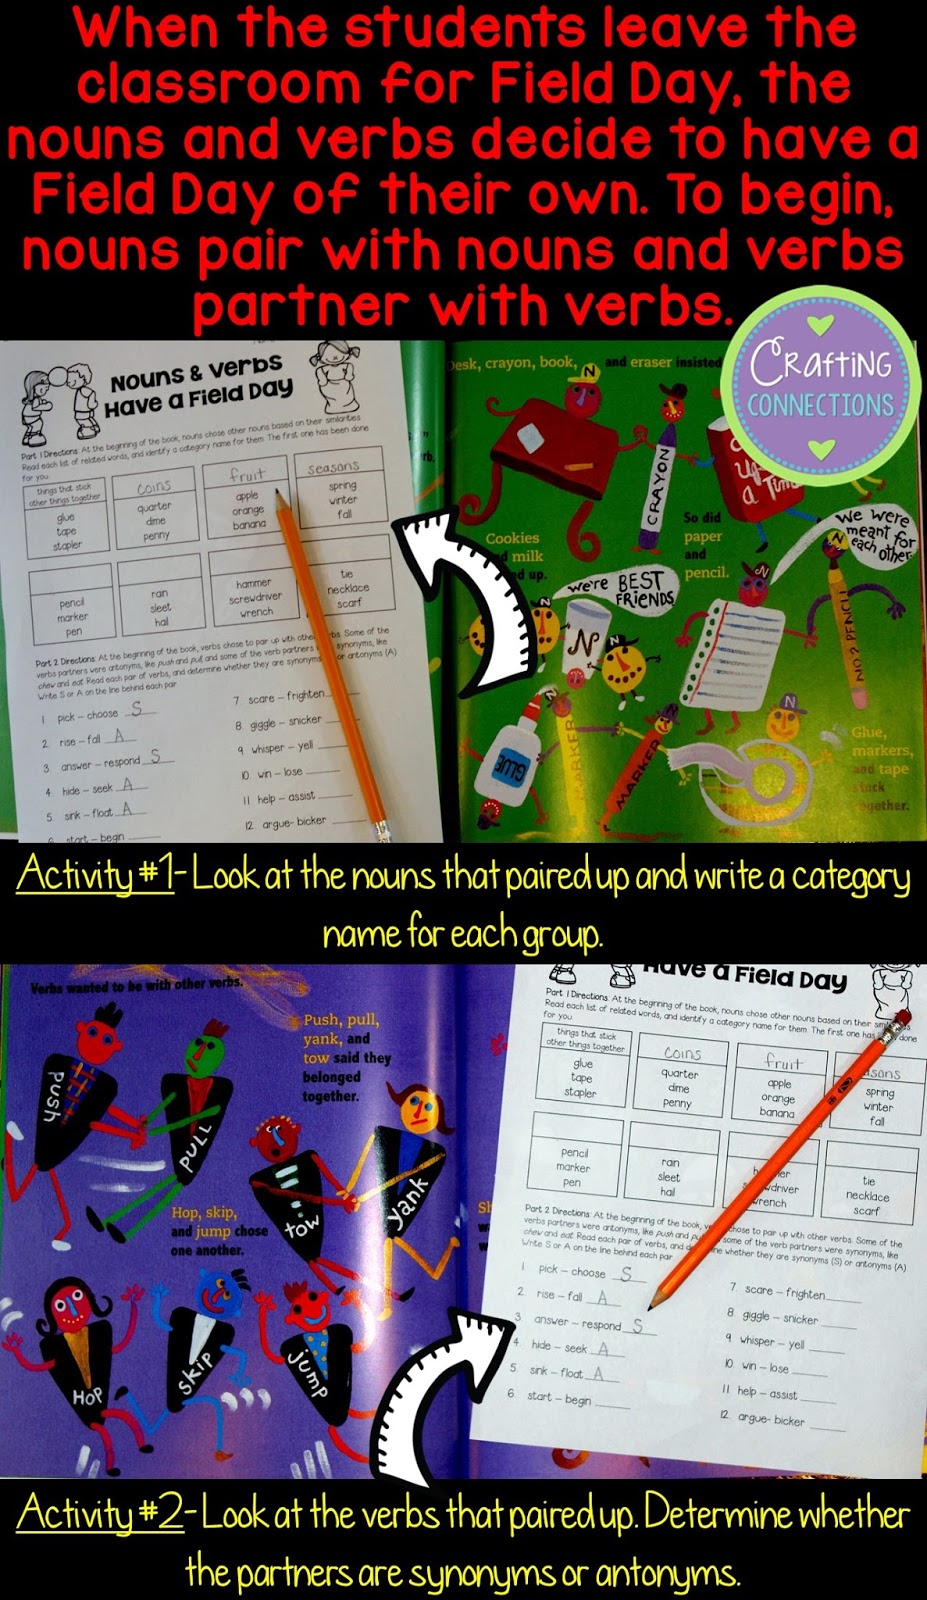 Crafting Connections: Following Up Field Day- Language Arts Activities